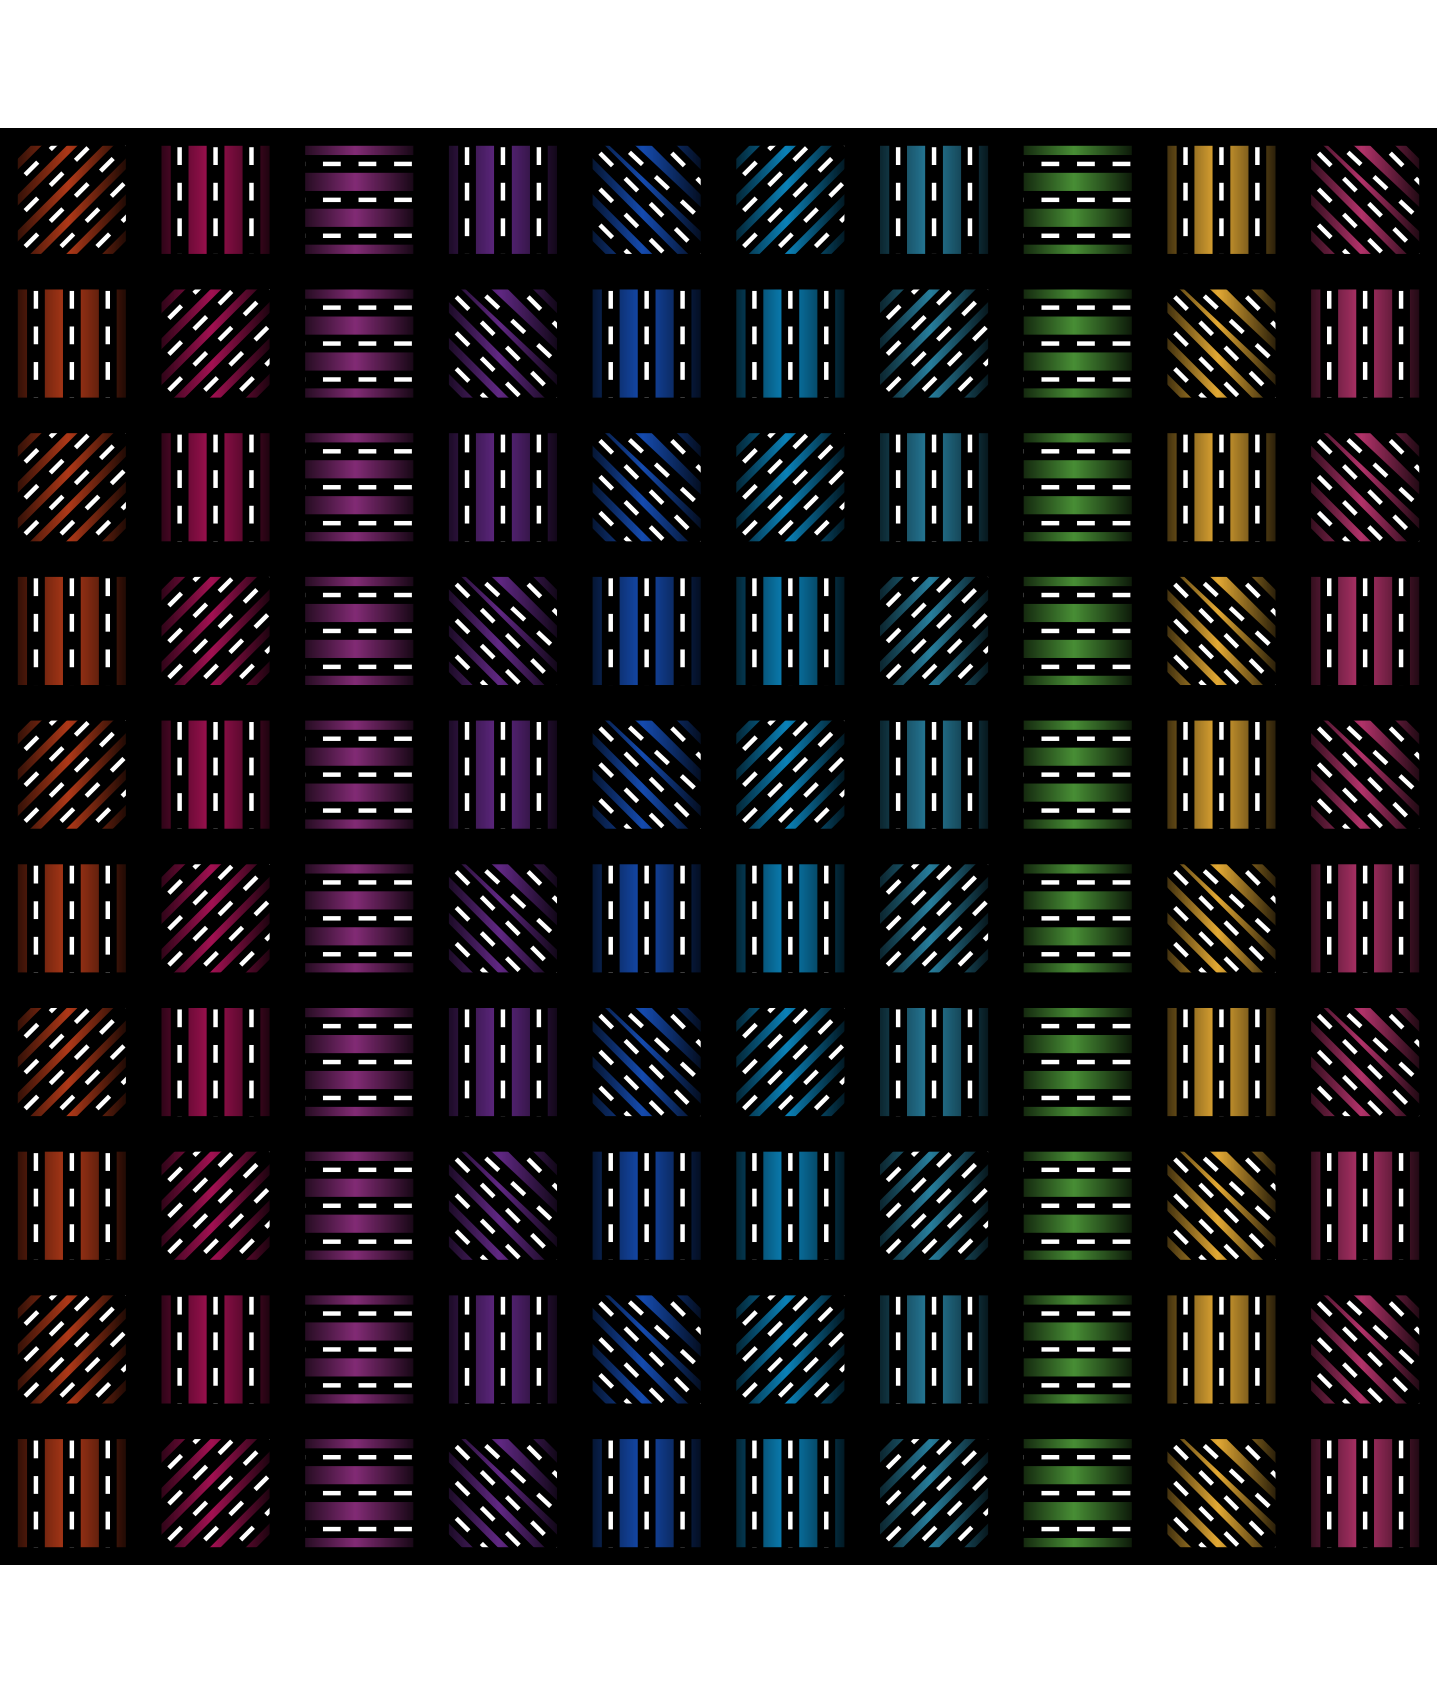 An image a black grid filled with rainbow colored tiles. Each title hase varying line patterns of thick black lines with striped white lines in the center moving in a vertical, diagonal, or horizontal pattern.